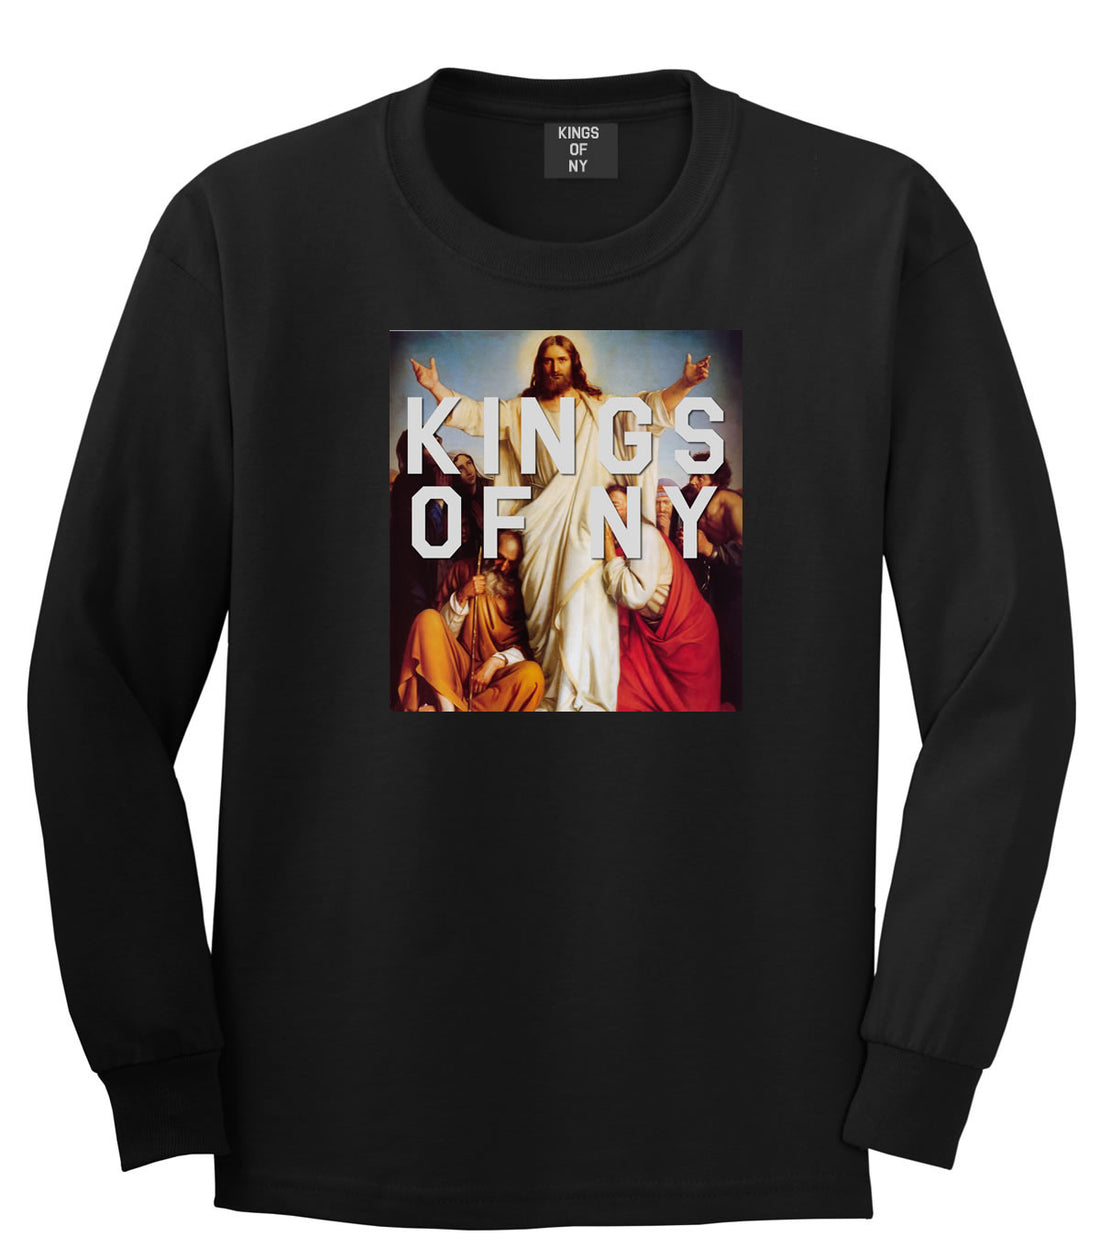 Jesus Worship and Praise of Power Long Sleeve T-Shirt in Black By Kings Of NY